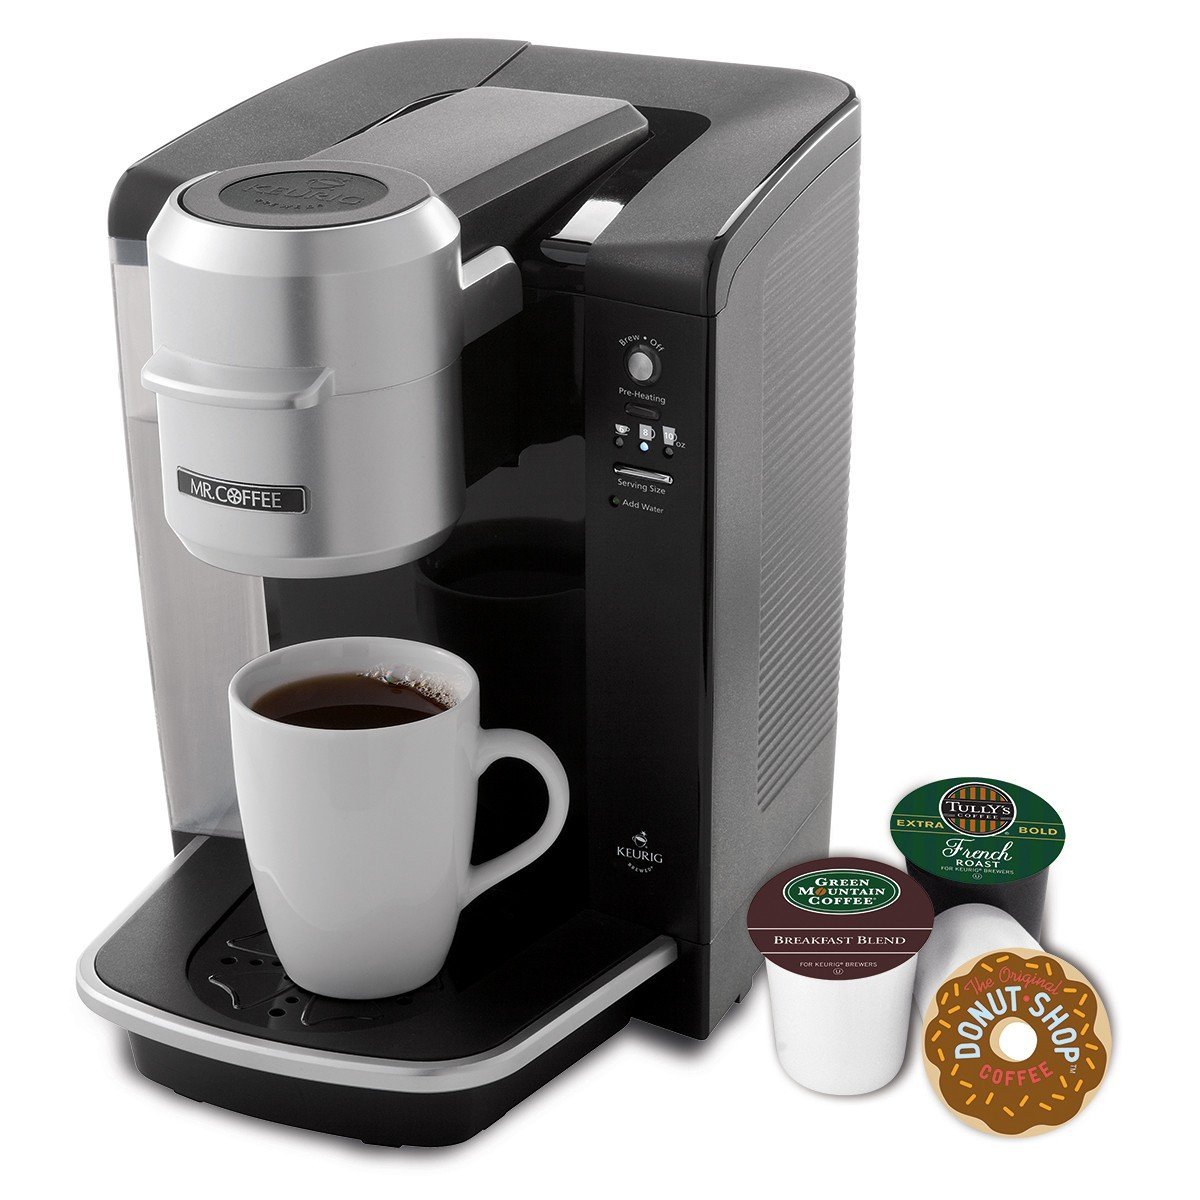 Mr. Coffee Single Serve Coffee Brewer for use with Keurig K-Cups